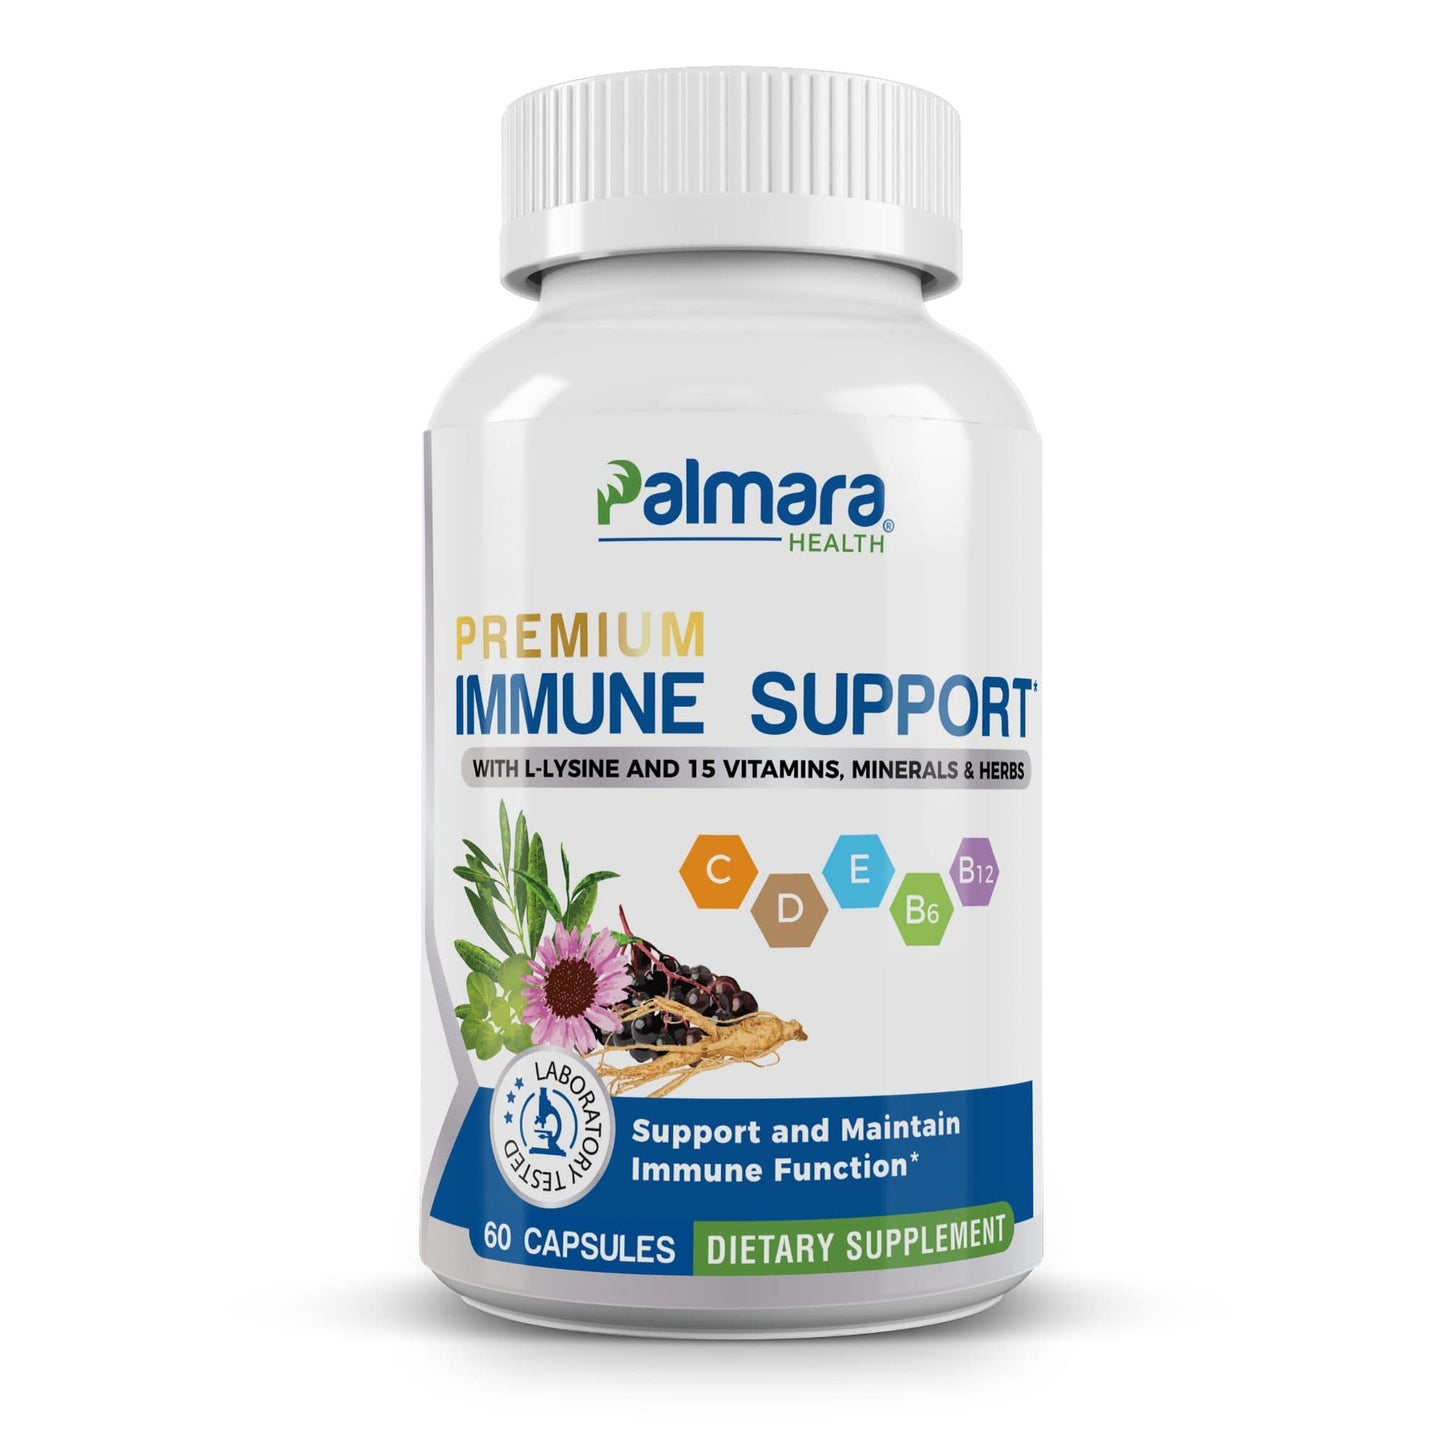 Front view of Palmara Health's Immune Support dietary supplement bottle, featuring a potent blend with L-Lysine and 15 other vitamins, minerals, and herbs to support and enhance immune function. Packaged in 60 vegetarian capsules, this supplement emphasizes its role in promoting overall immune health.